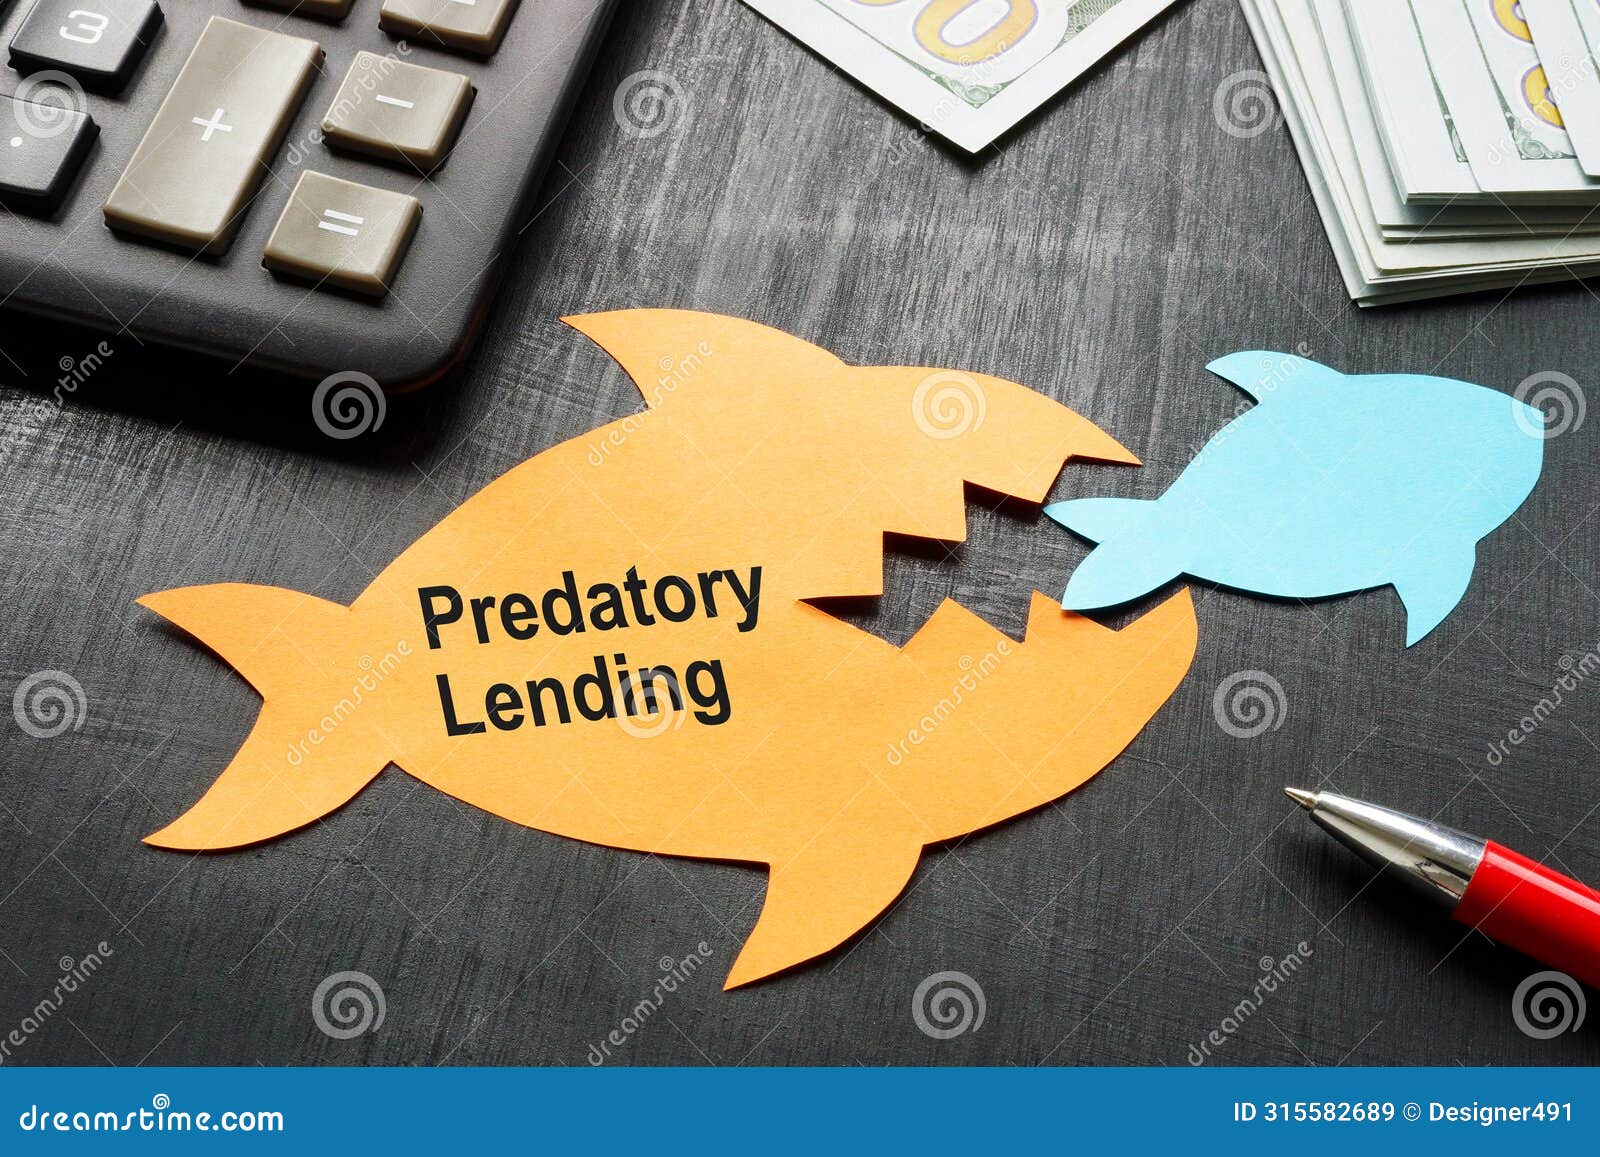 predatory lending concept. two paper fish on the office table.